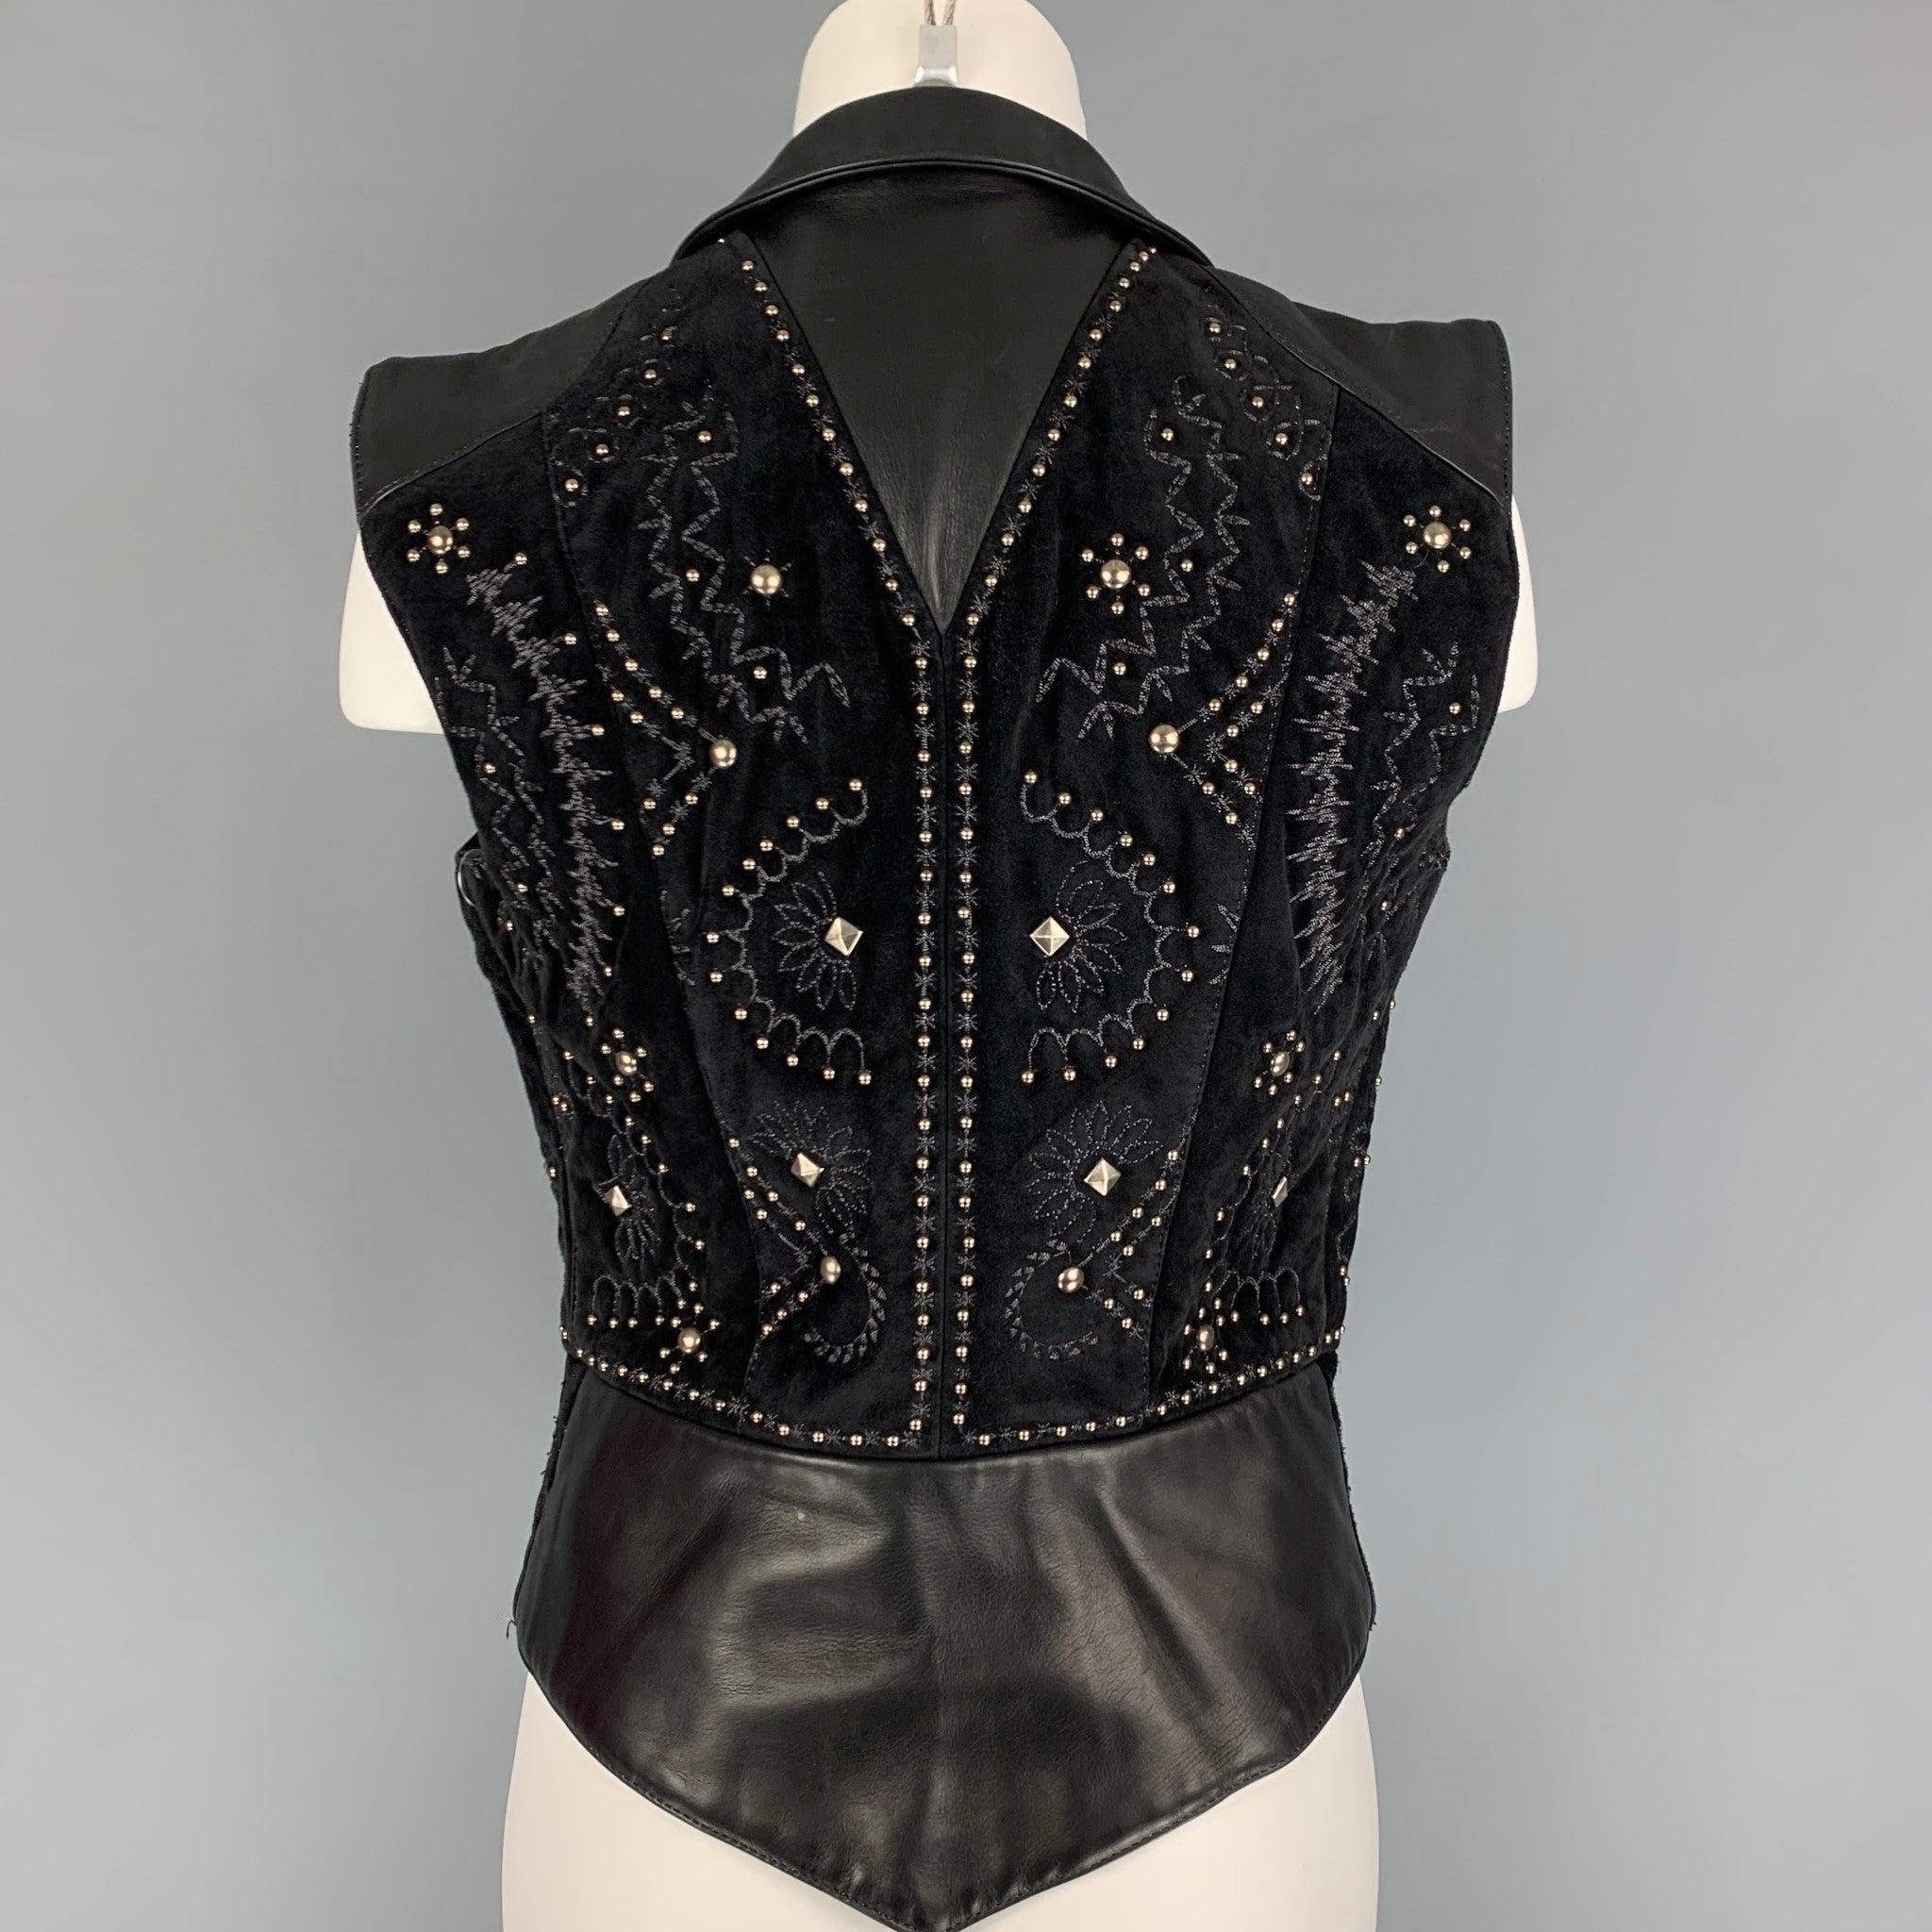 DONALD J PLINER Size One Size Black Leather Studded Buttoned Vest In Good Condition For Sale In San Francisco, CA